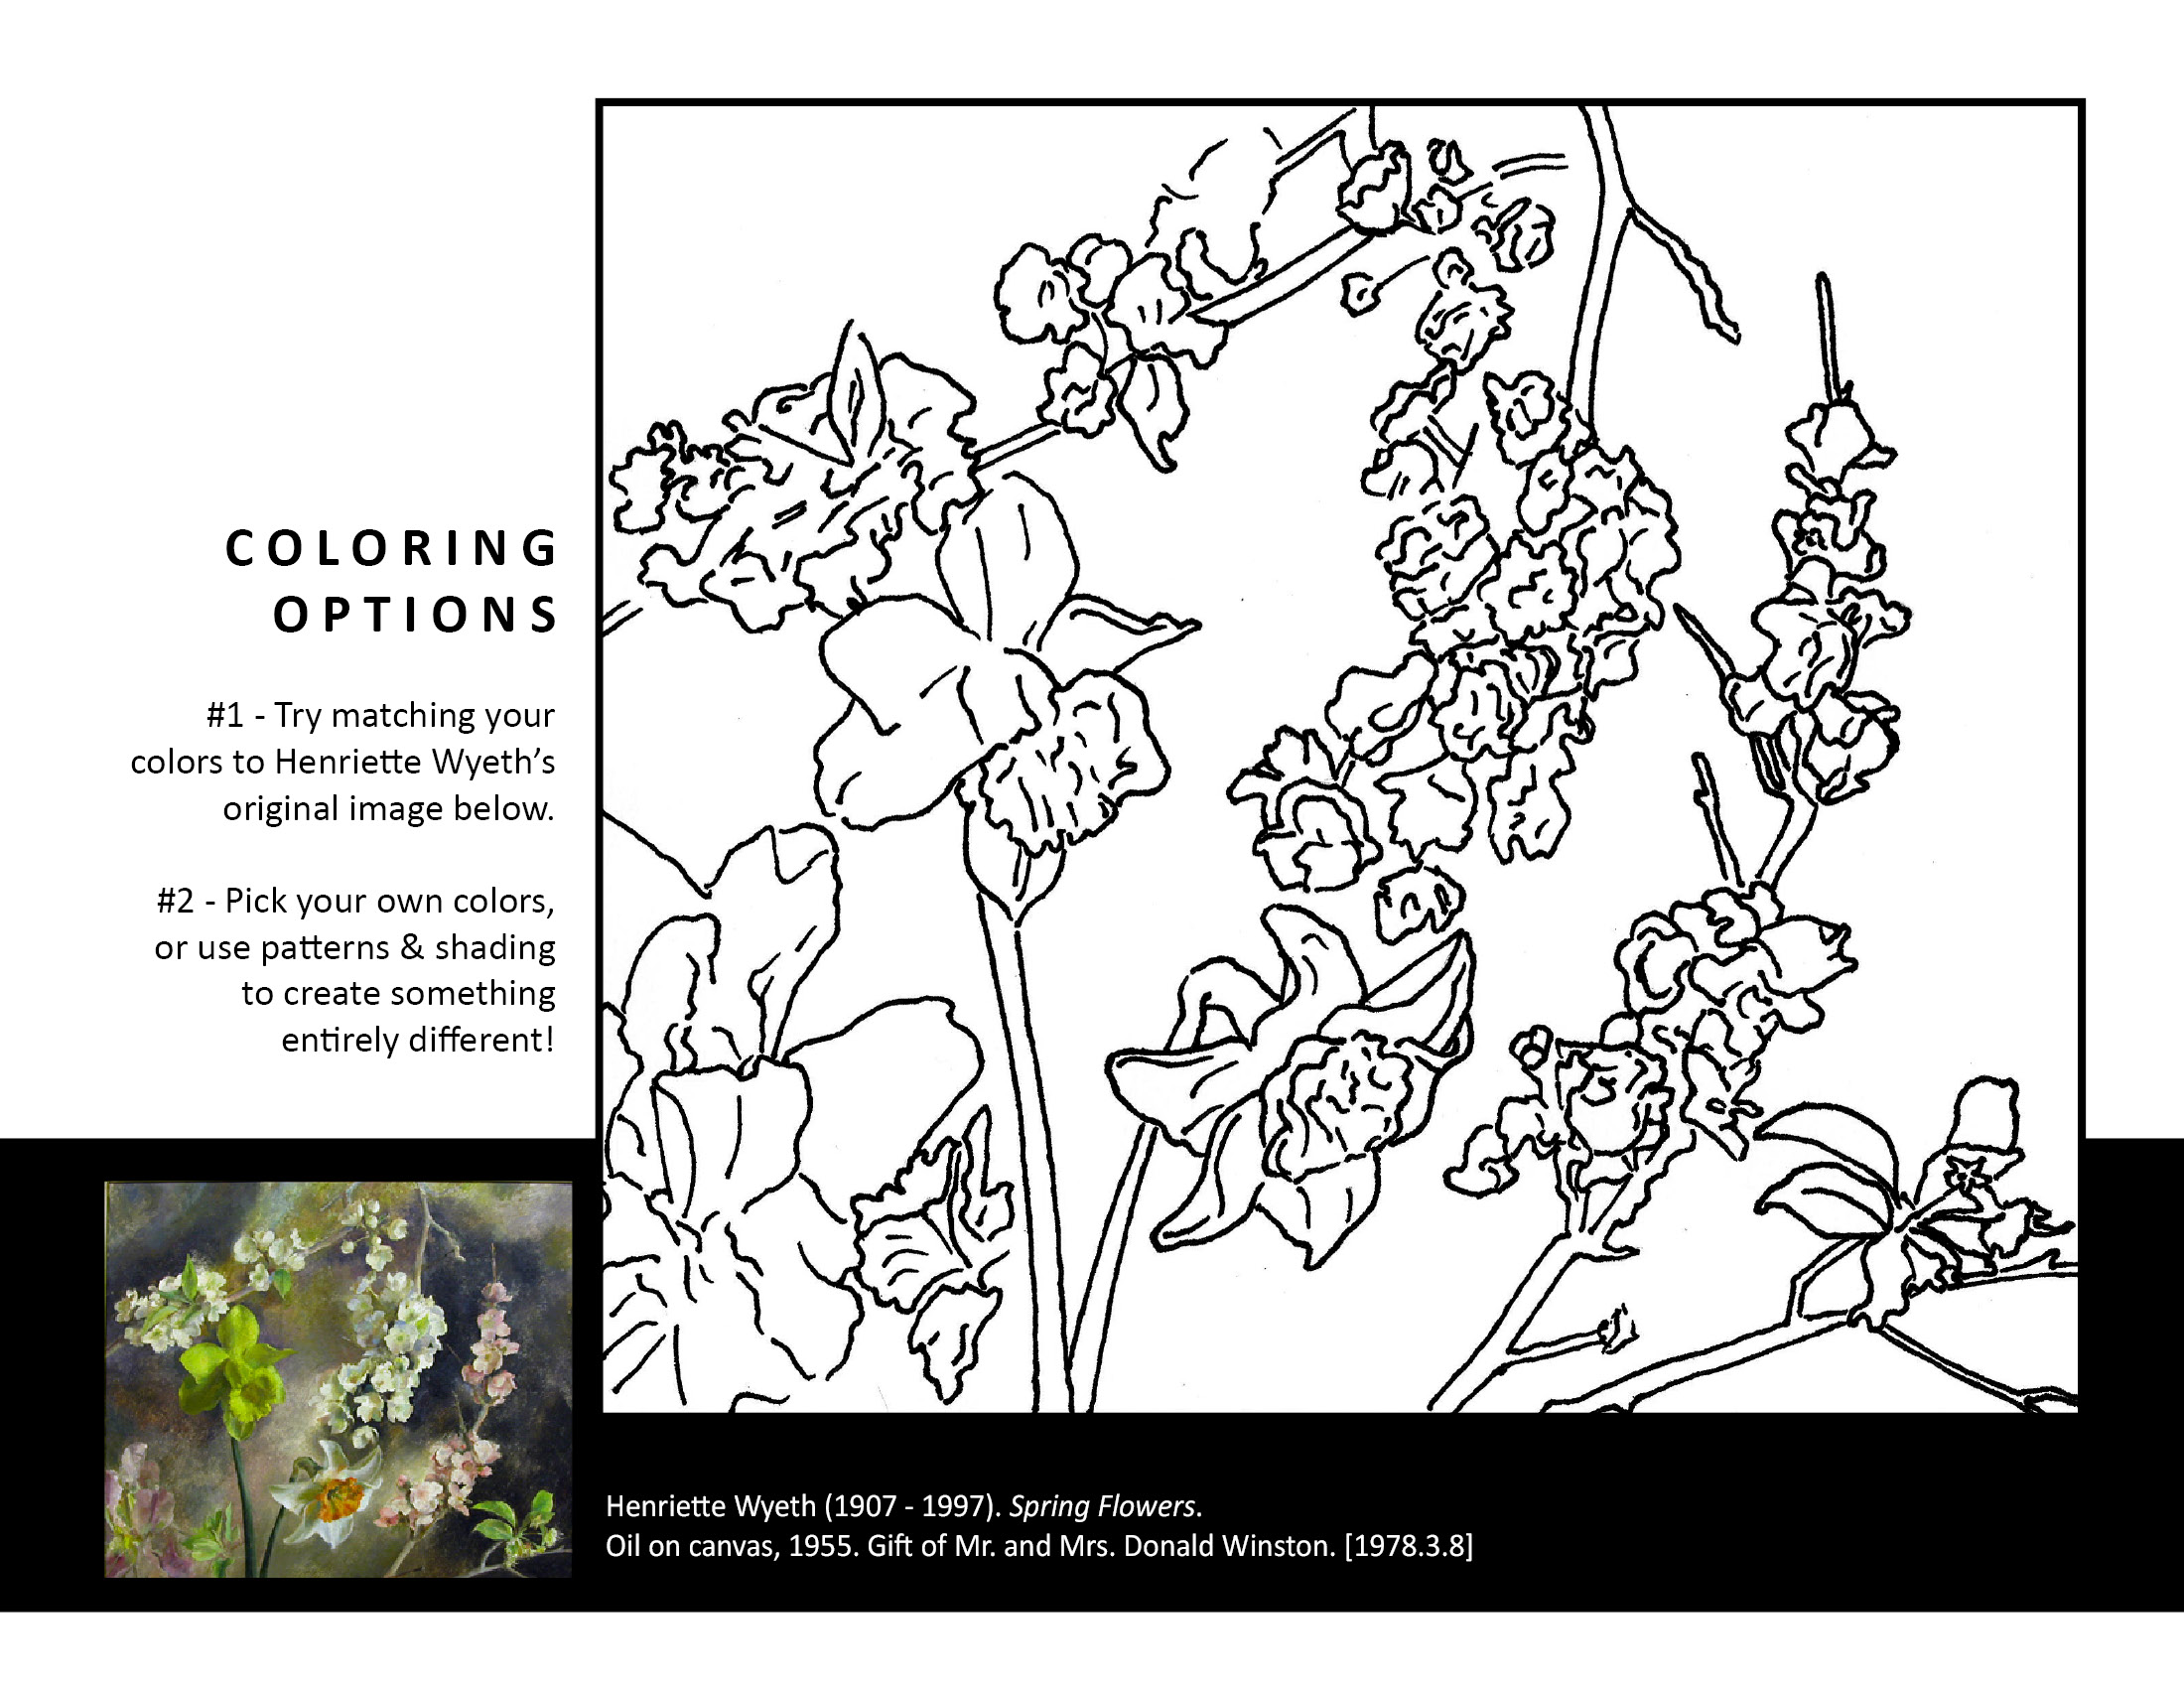 ACADEMY MUSEUM X OMY COLORING SHEET